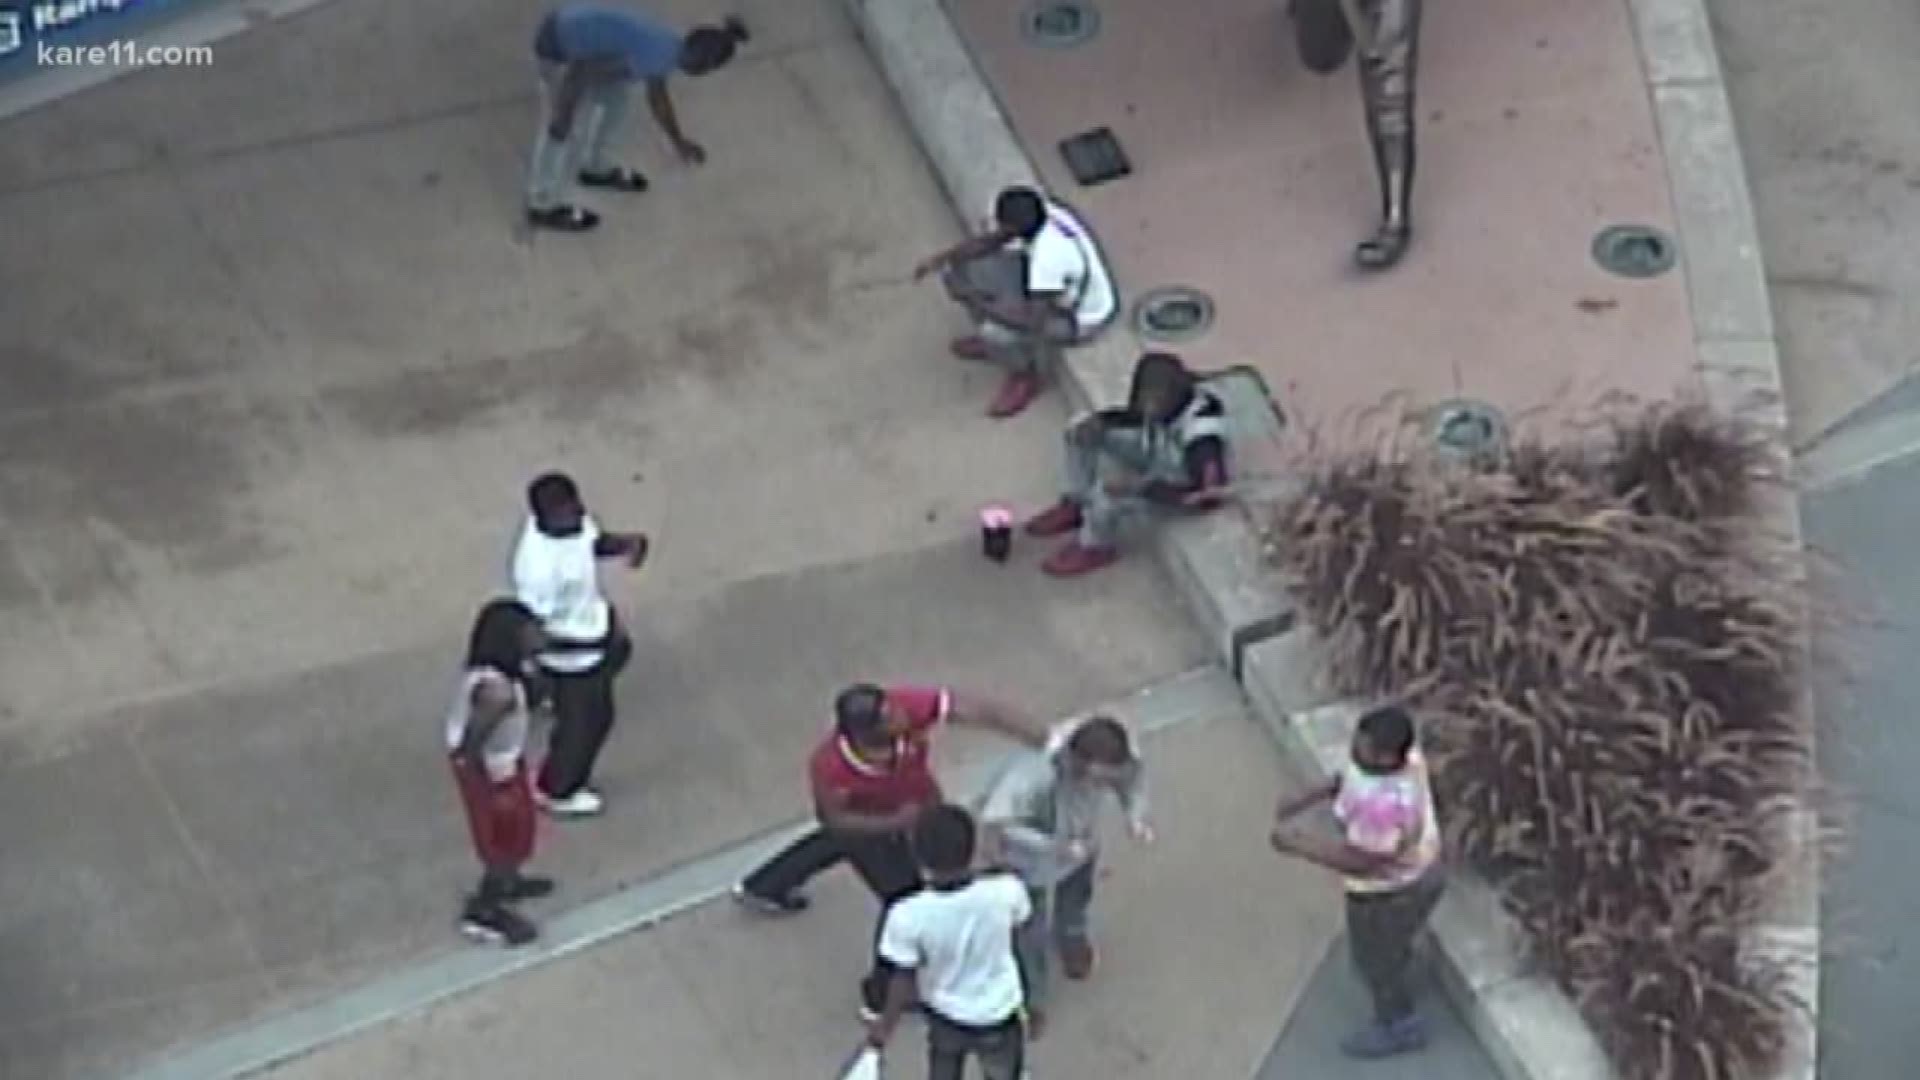 The shocking videos show mobs of people beating victims senseless in downtown Minneapolis